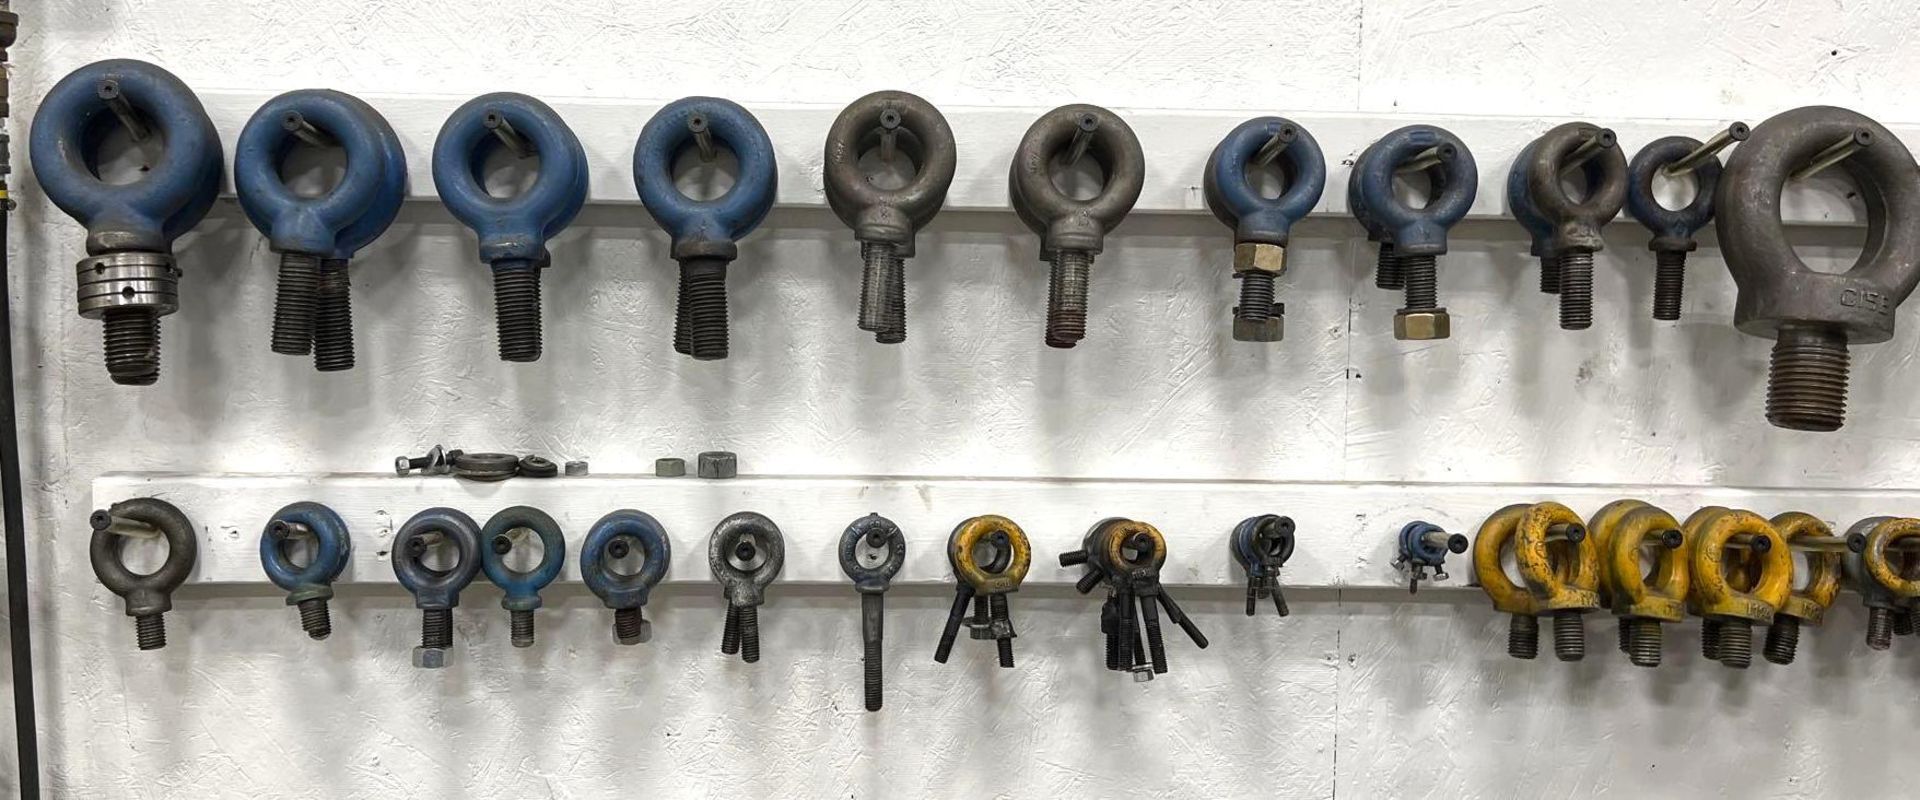 Lot of Assorted Eye Bolts, VariouSizes, Hanging on Wall - Image 5 of 5